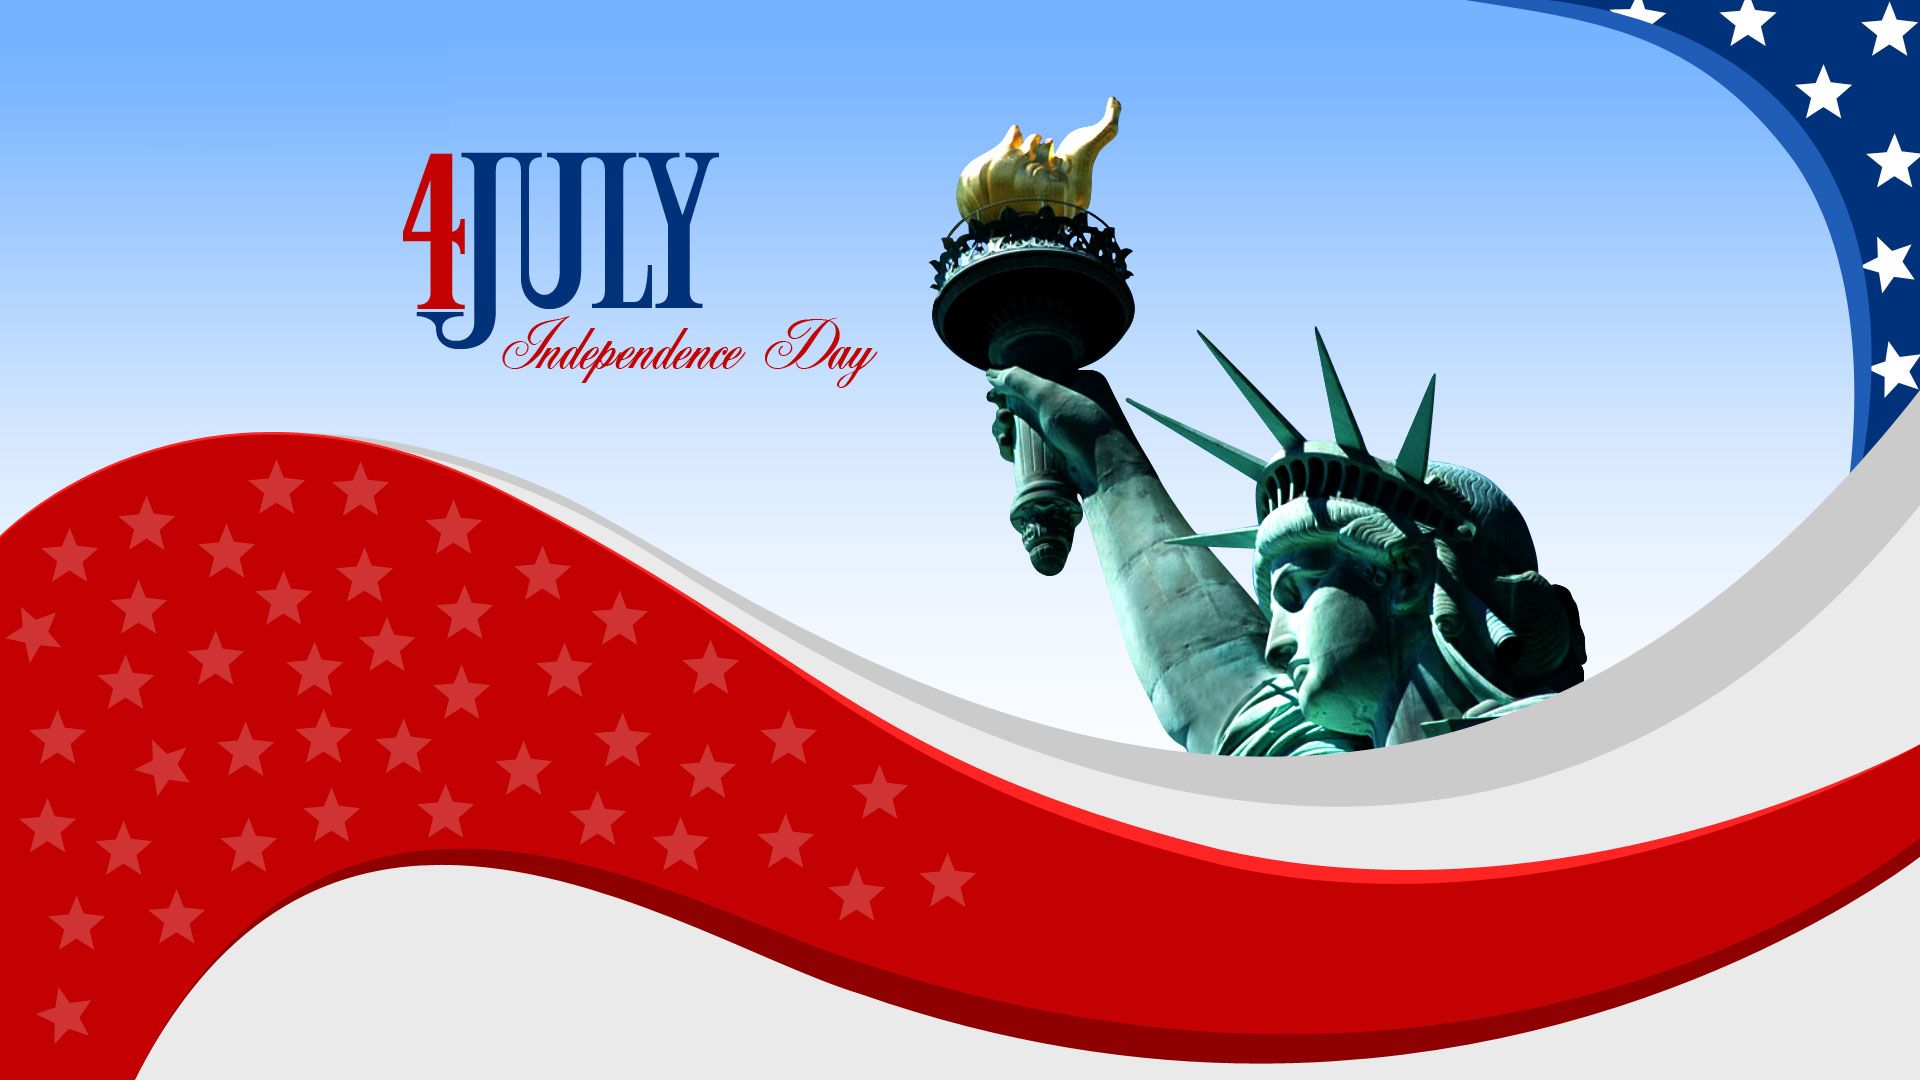 4Th Of July Independence Day HD Desktop Wallpaper